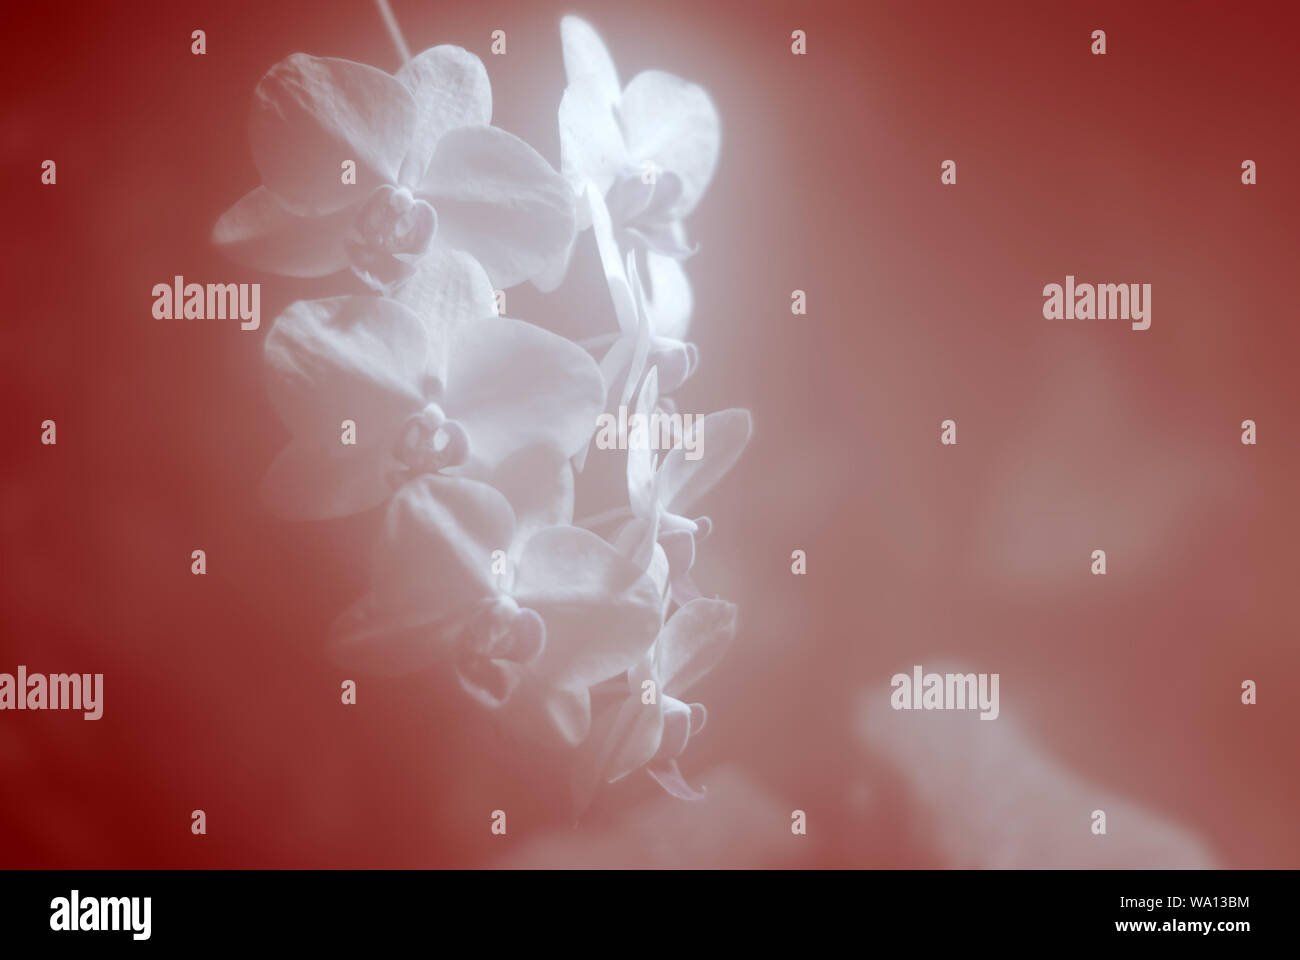 delicate pink blurred background with white orchid flowers Stock Photo